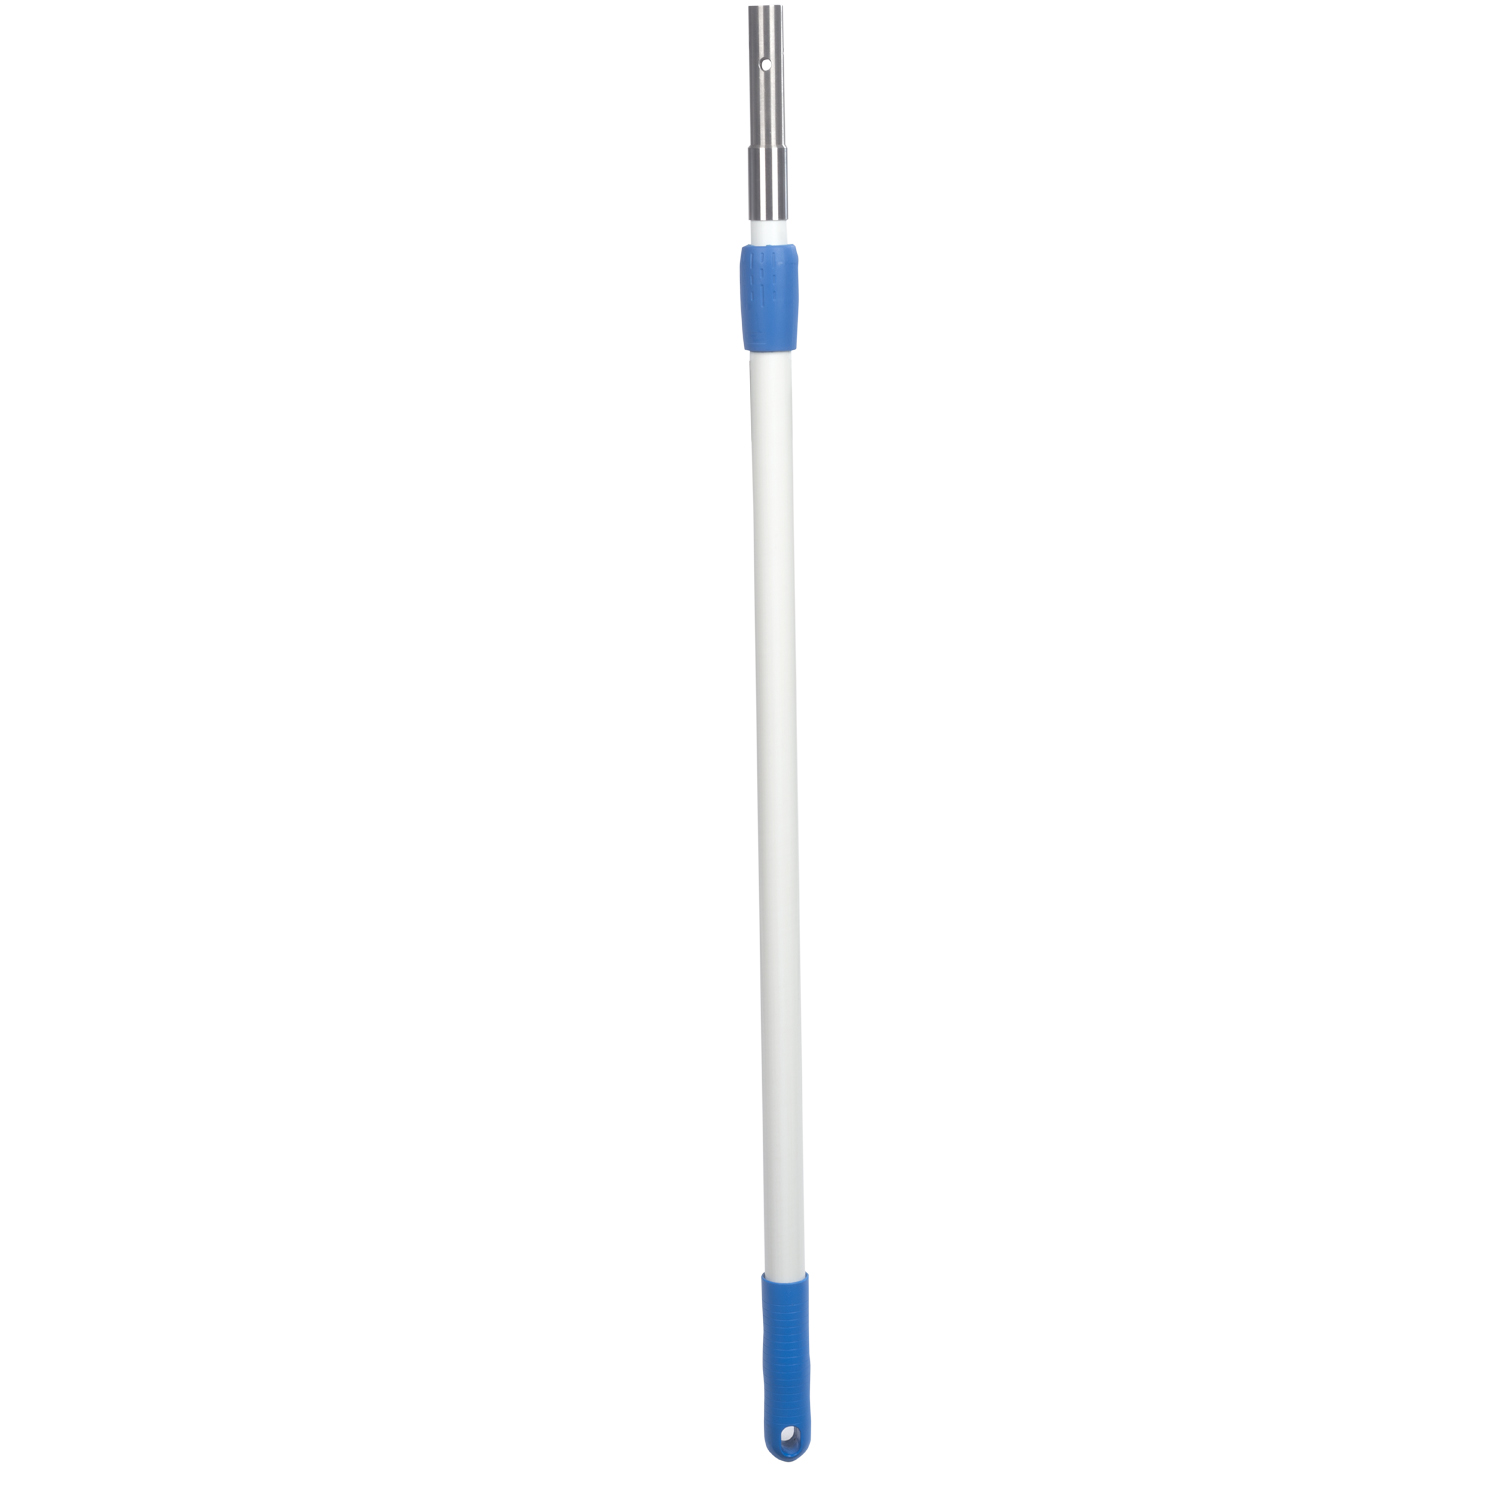 Ldr Industries 21-1/2 in. Drain Cling Stick, Easy-to-Clean